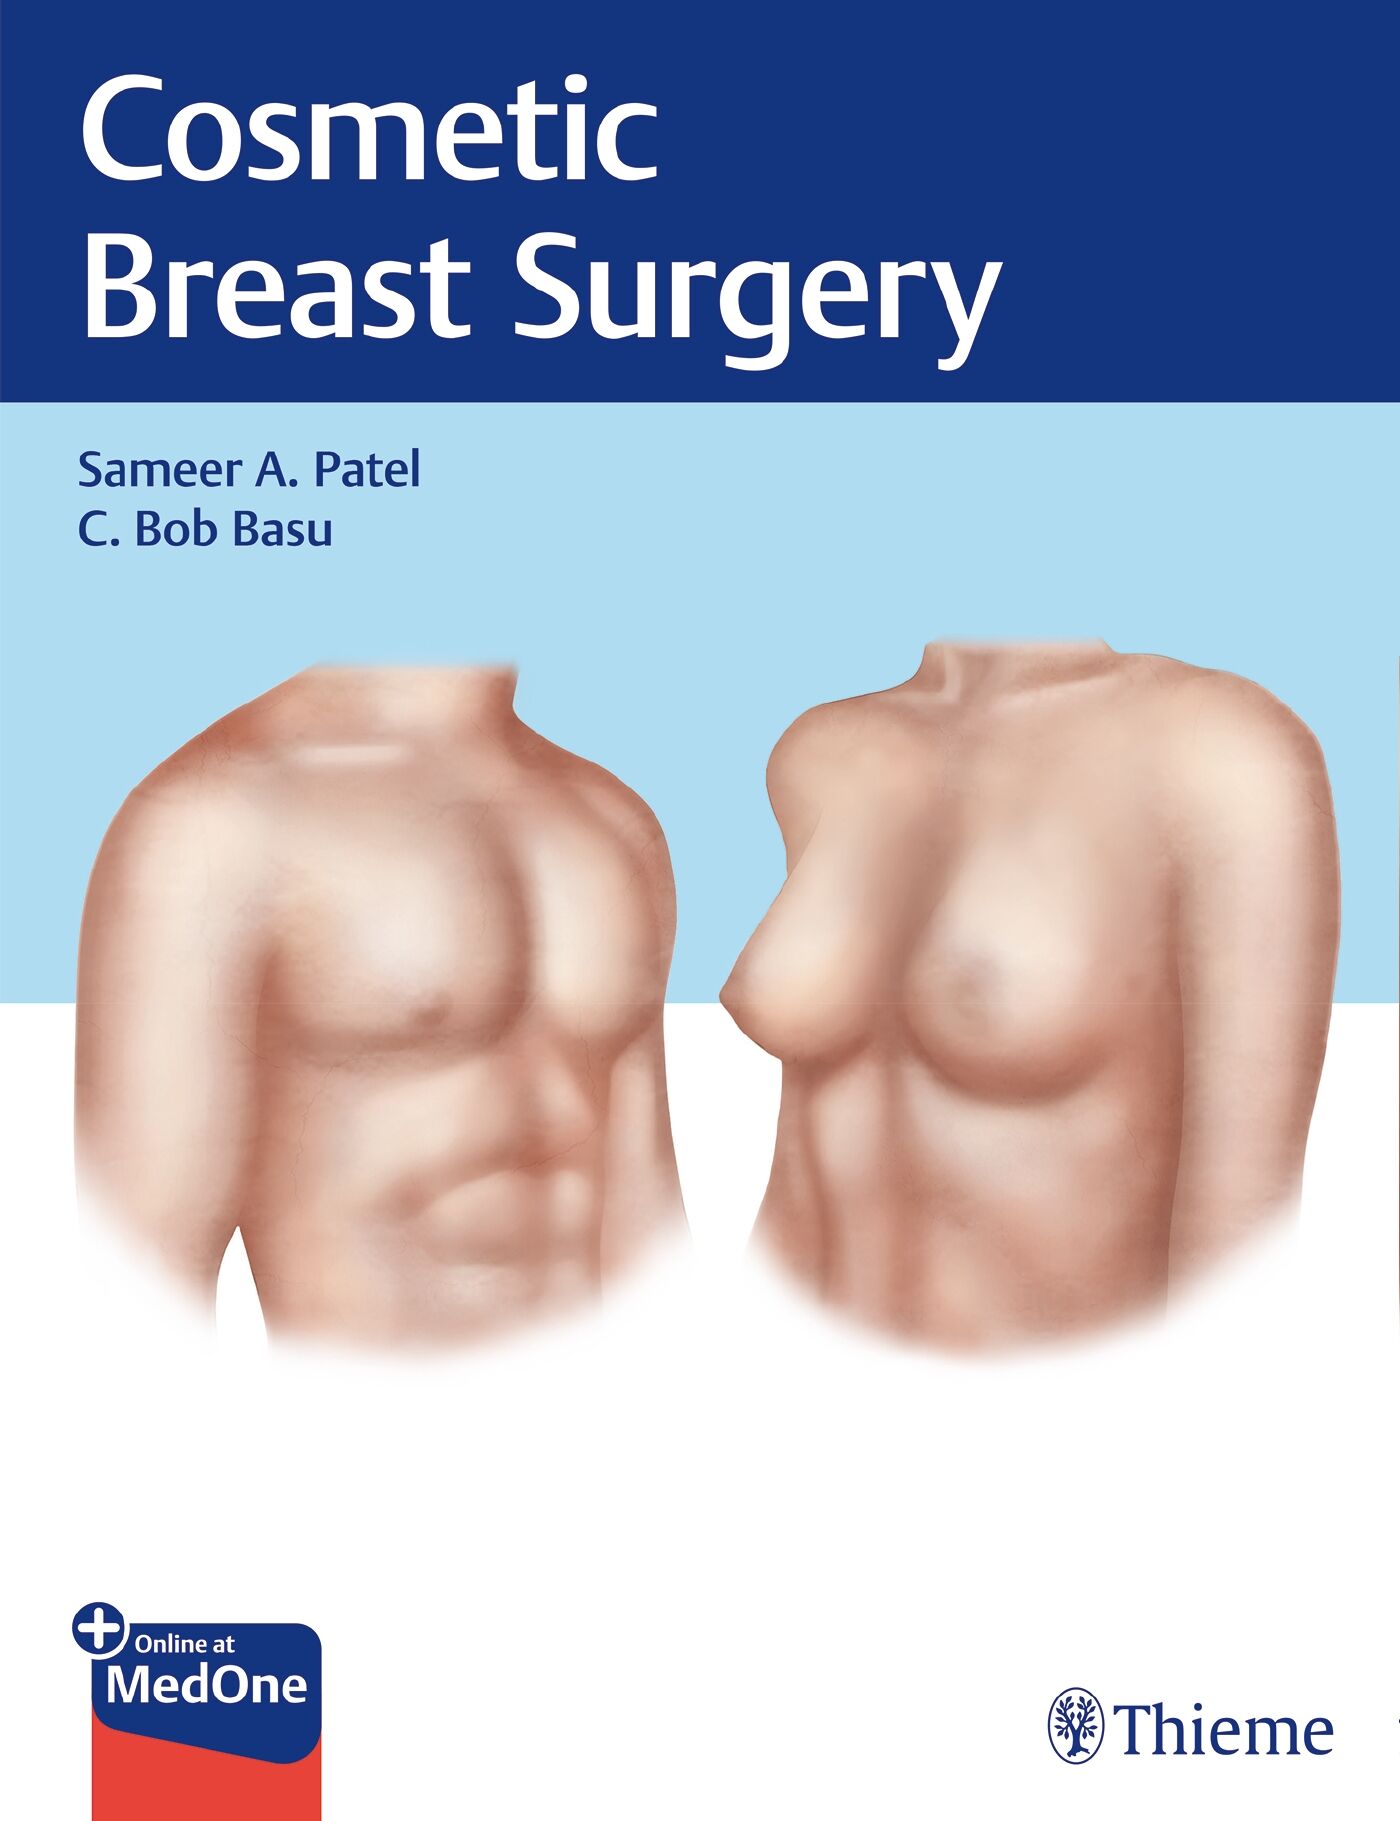 Cosmetic Breast Surgery, 9781626235281